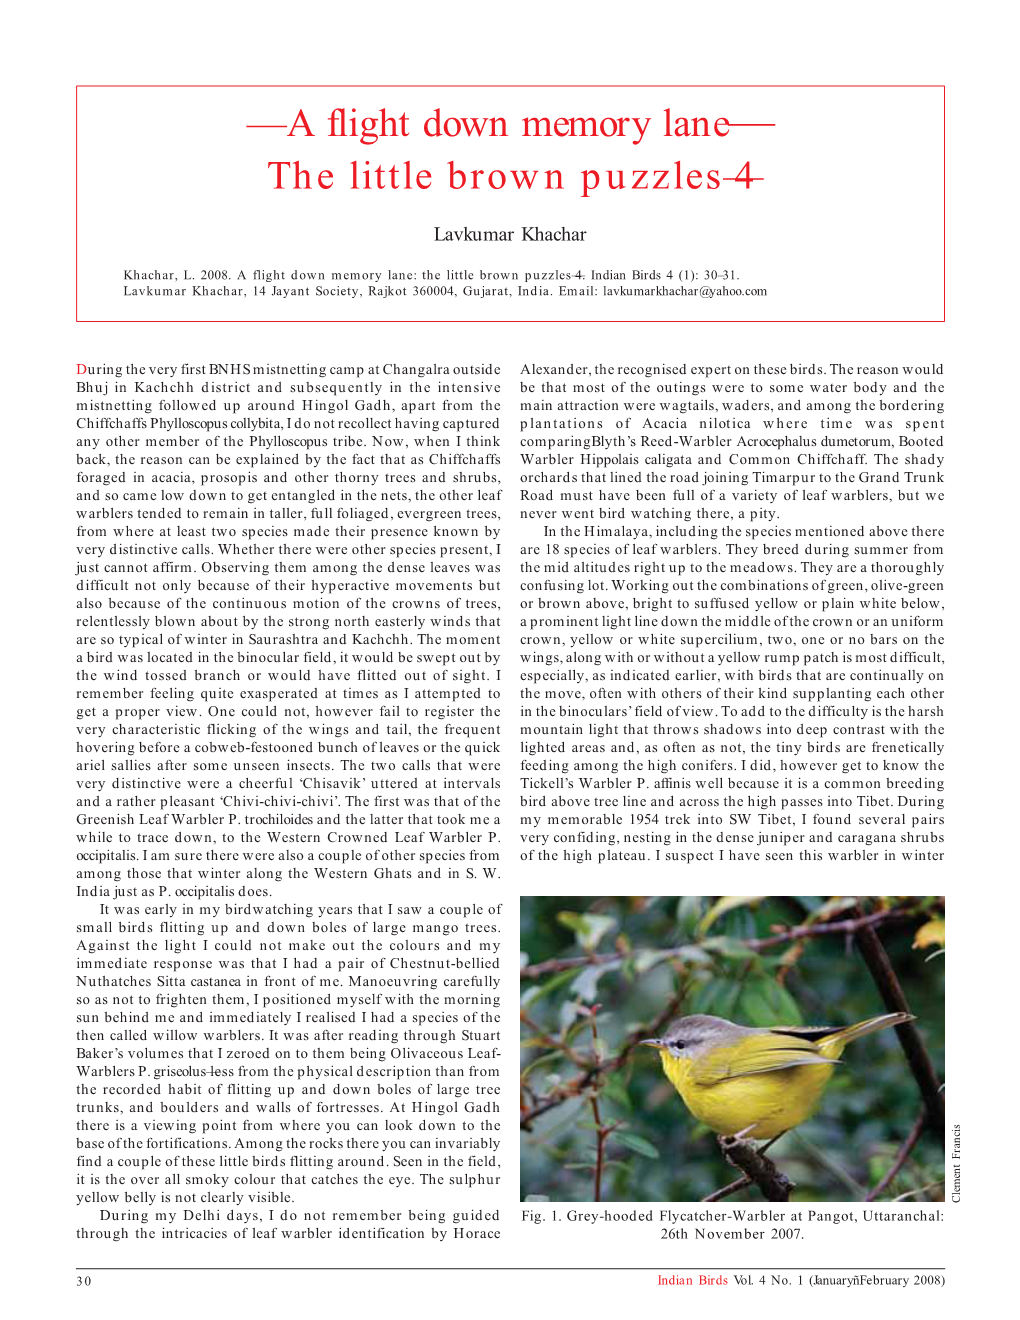 —A Flight Down Memory Lane— the Little Brown Puzzles—4